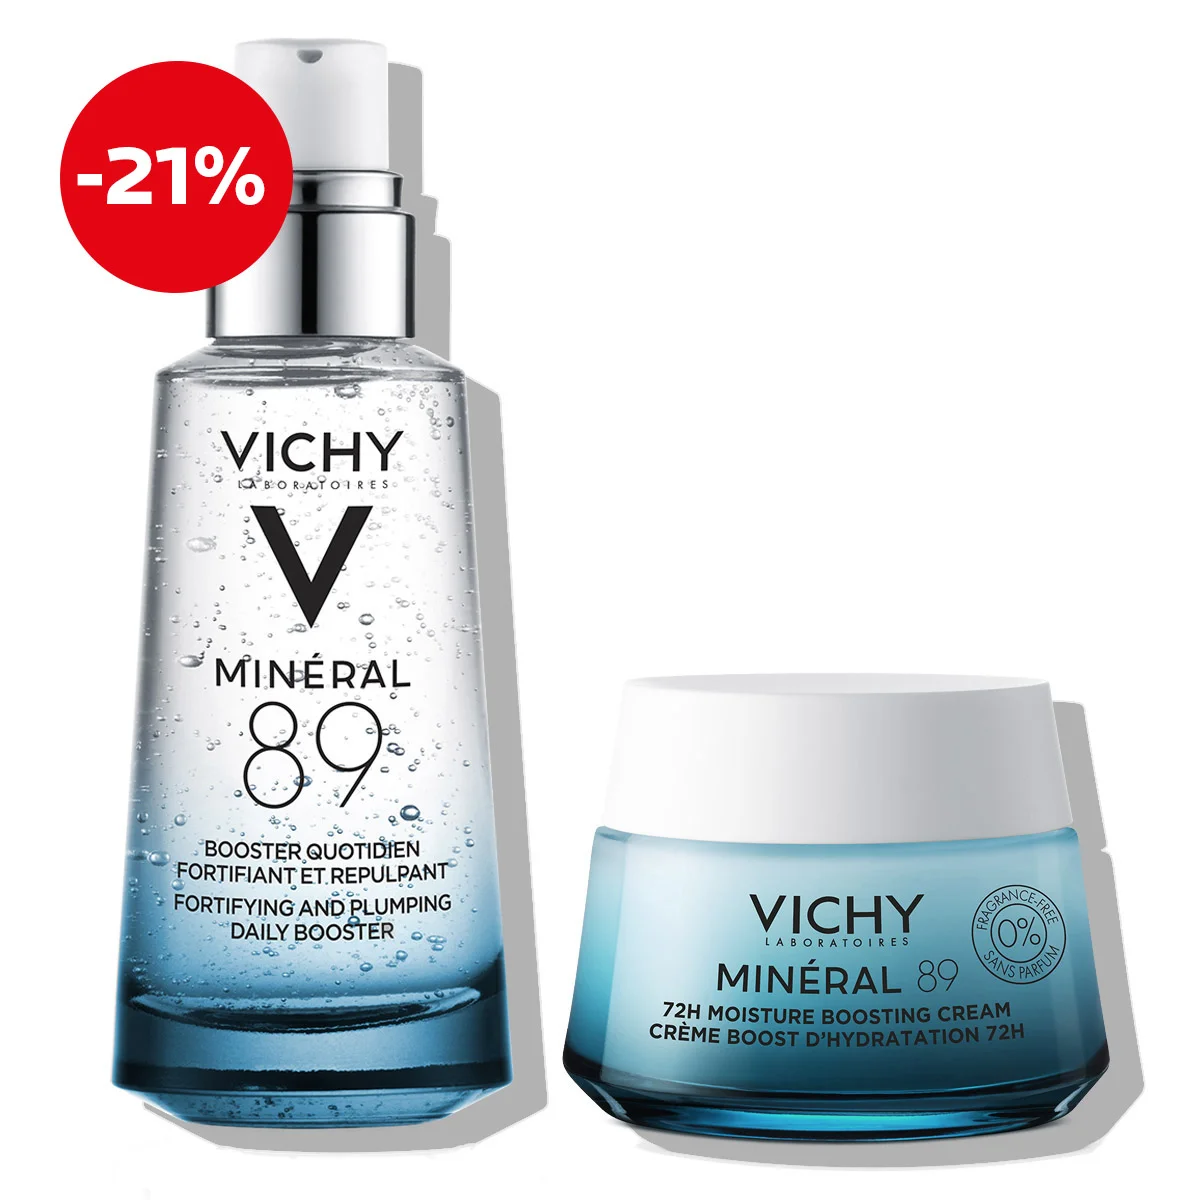 Vichy MINERAL 89 Protocol for intensive hydration and stronger skin for all skin types (1)